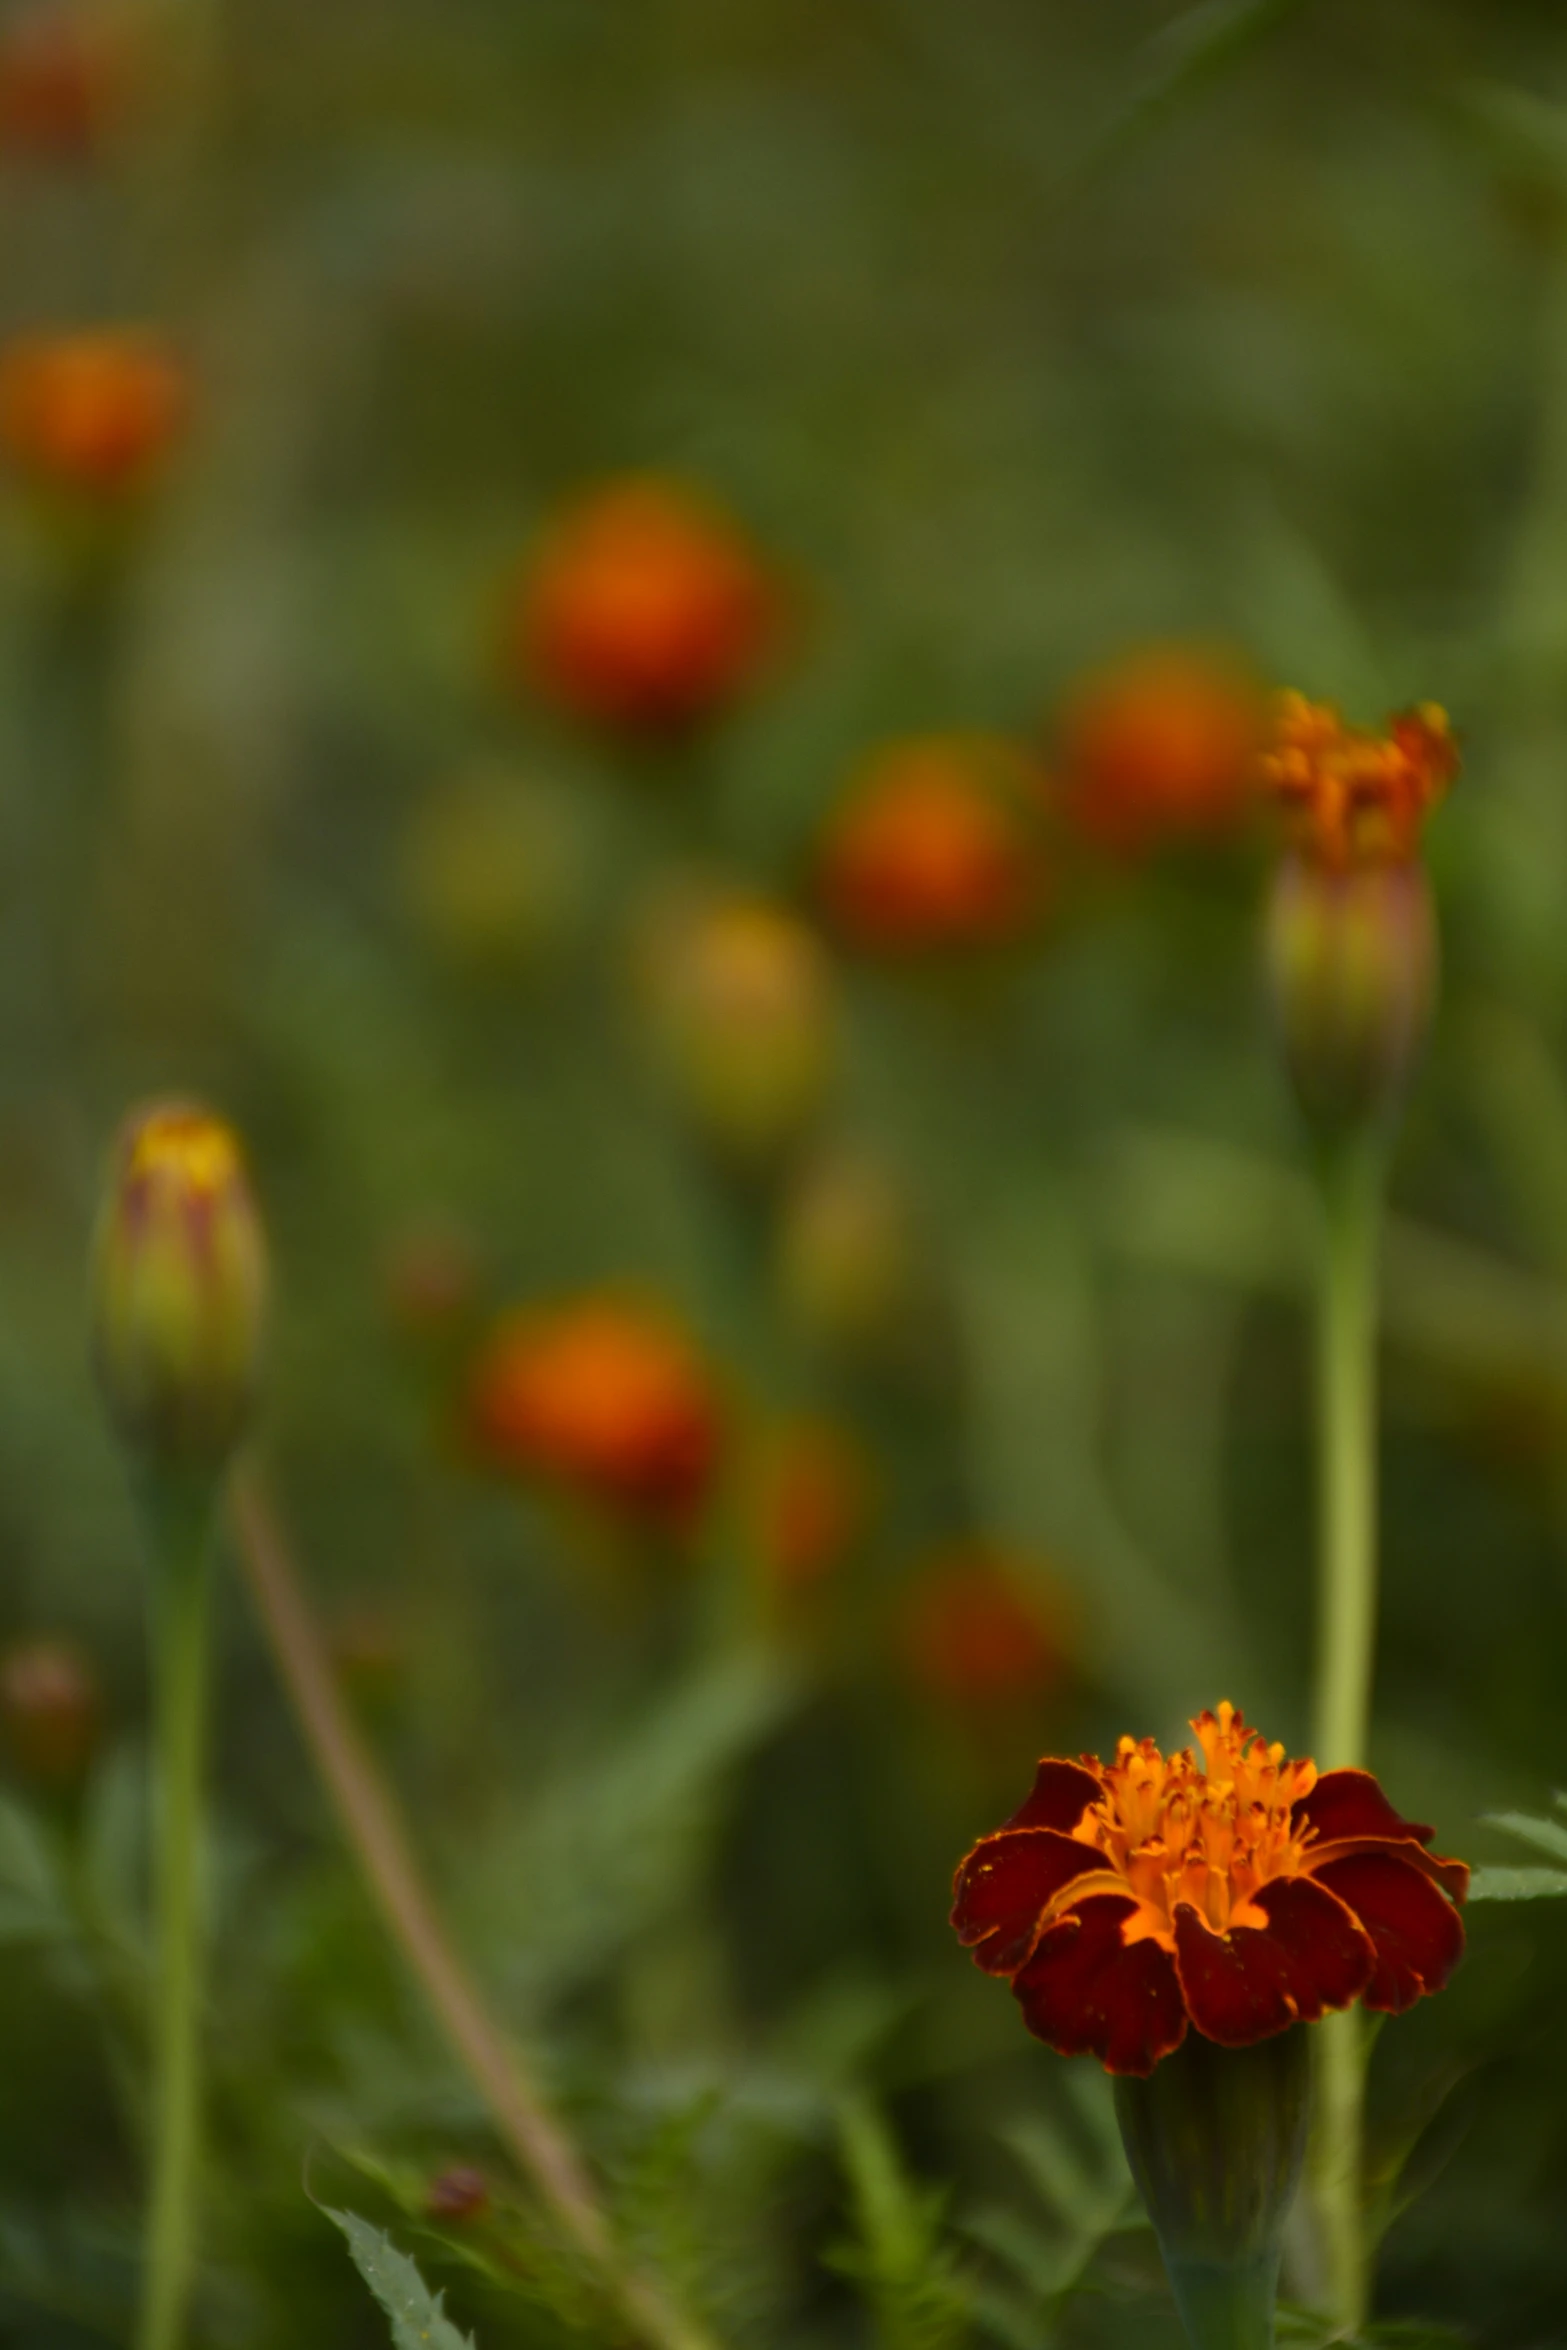 a single red flower with orange center sitting in the middle of some flowers